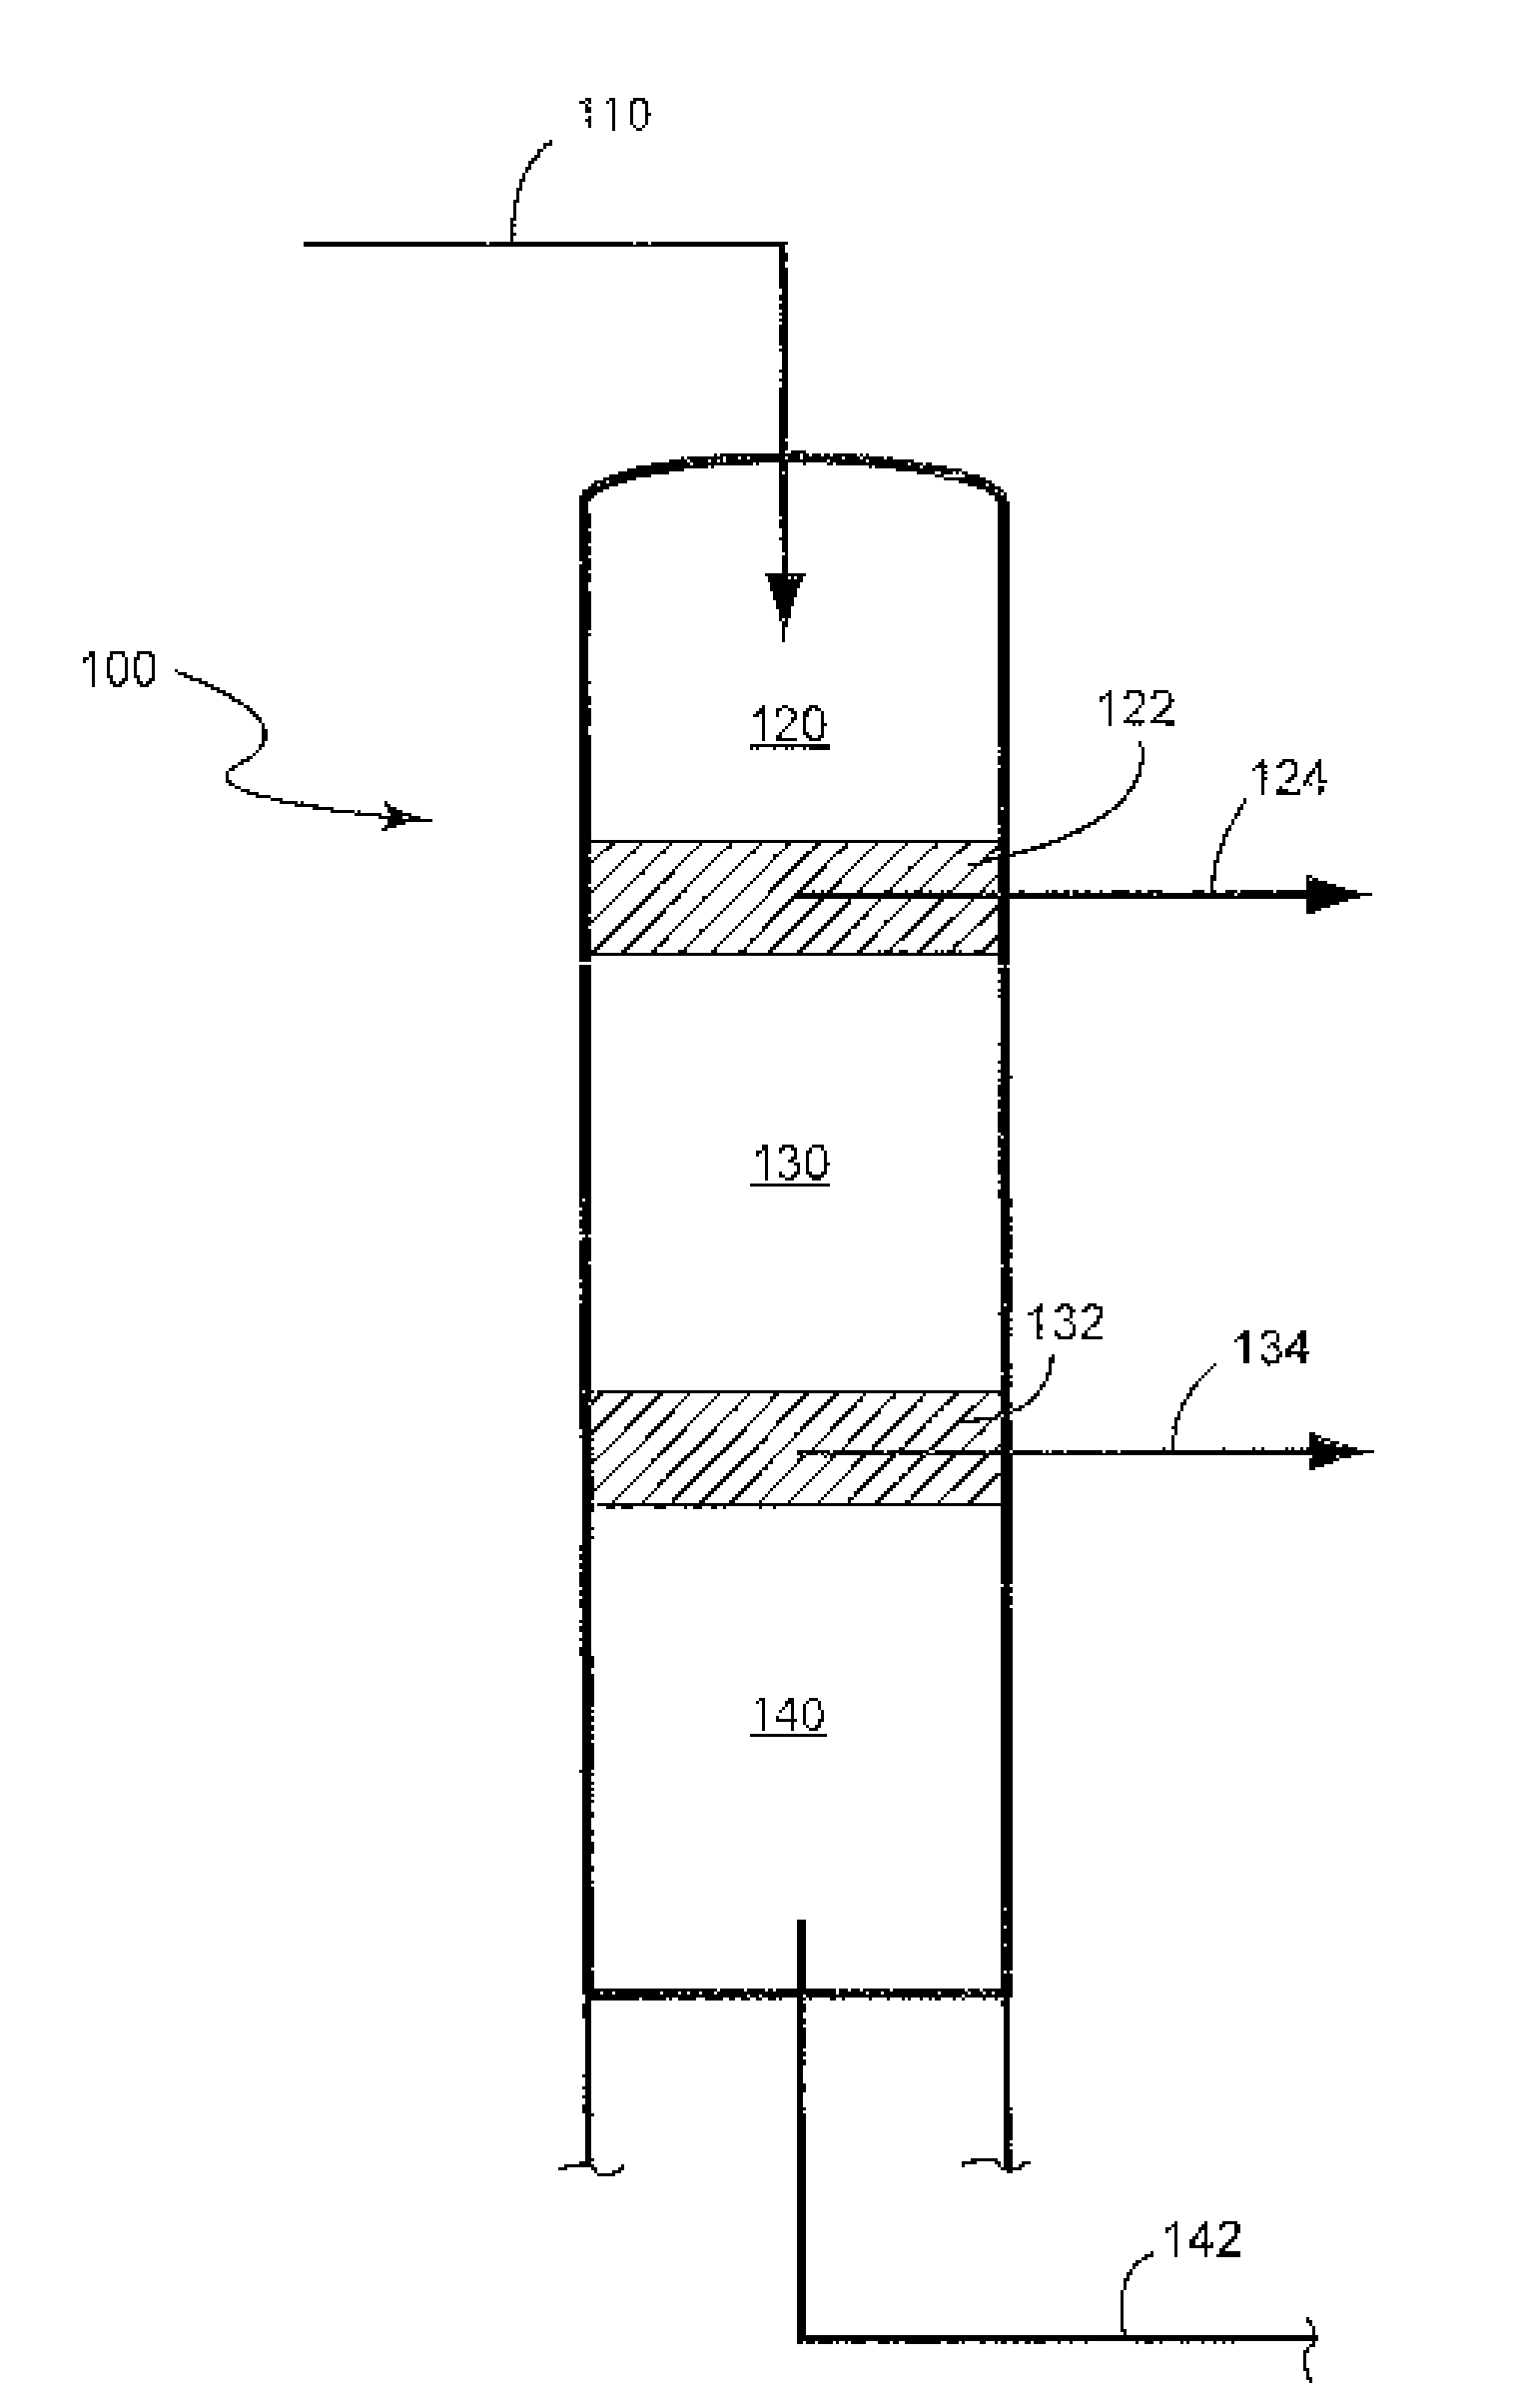 Apparatus and method for hydrolysis of cellulosic material in a two-step process